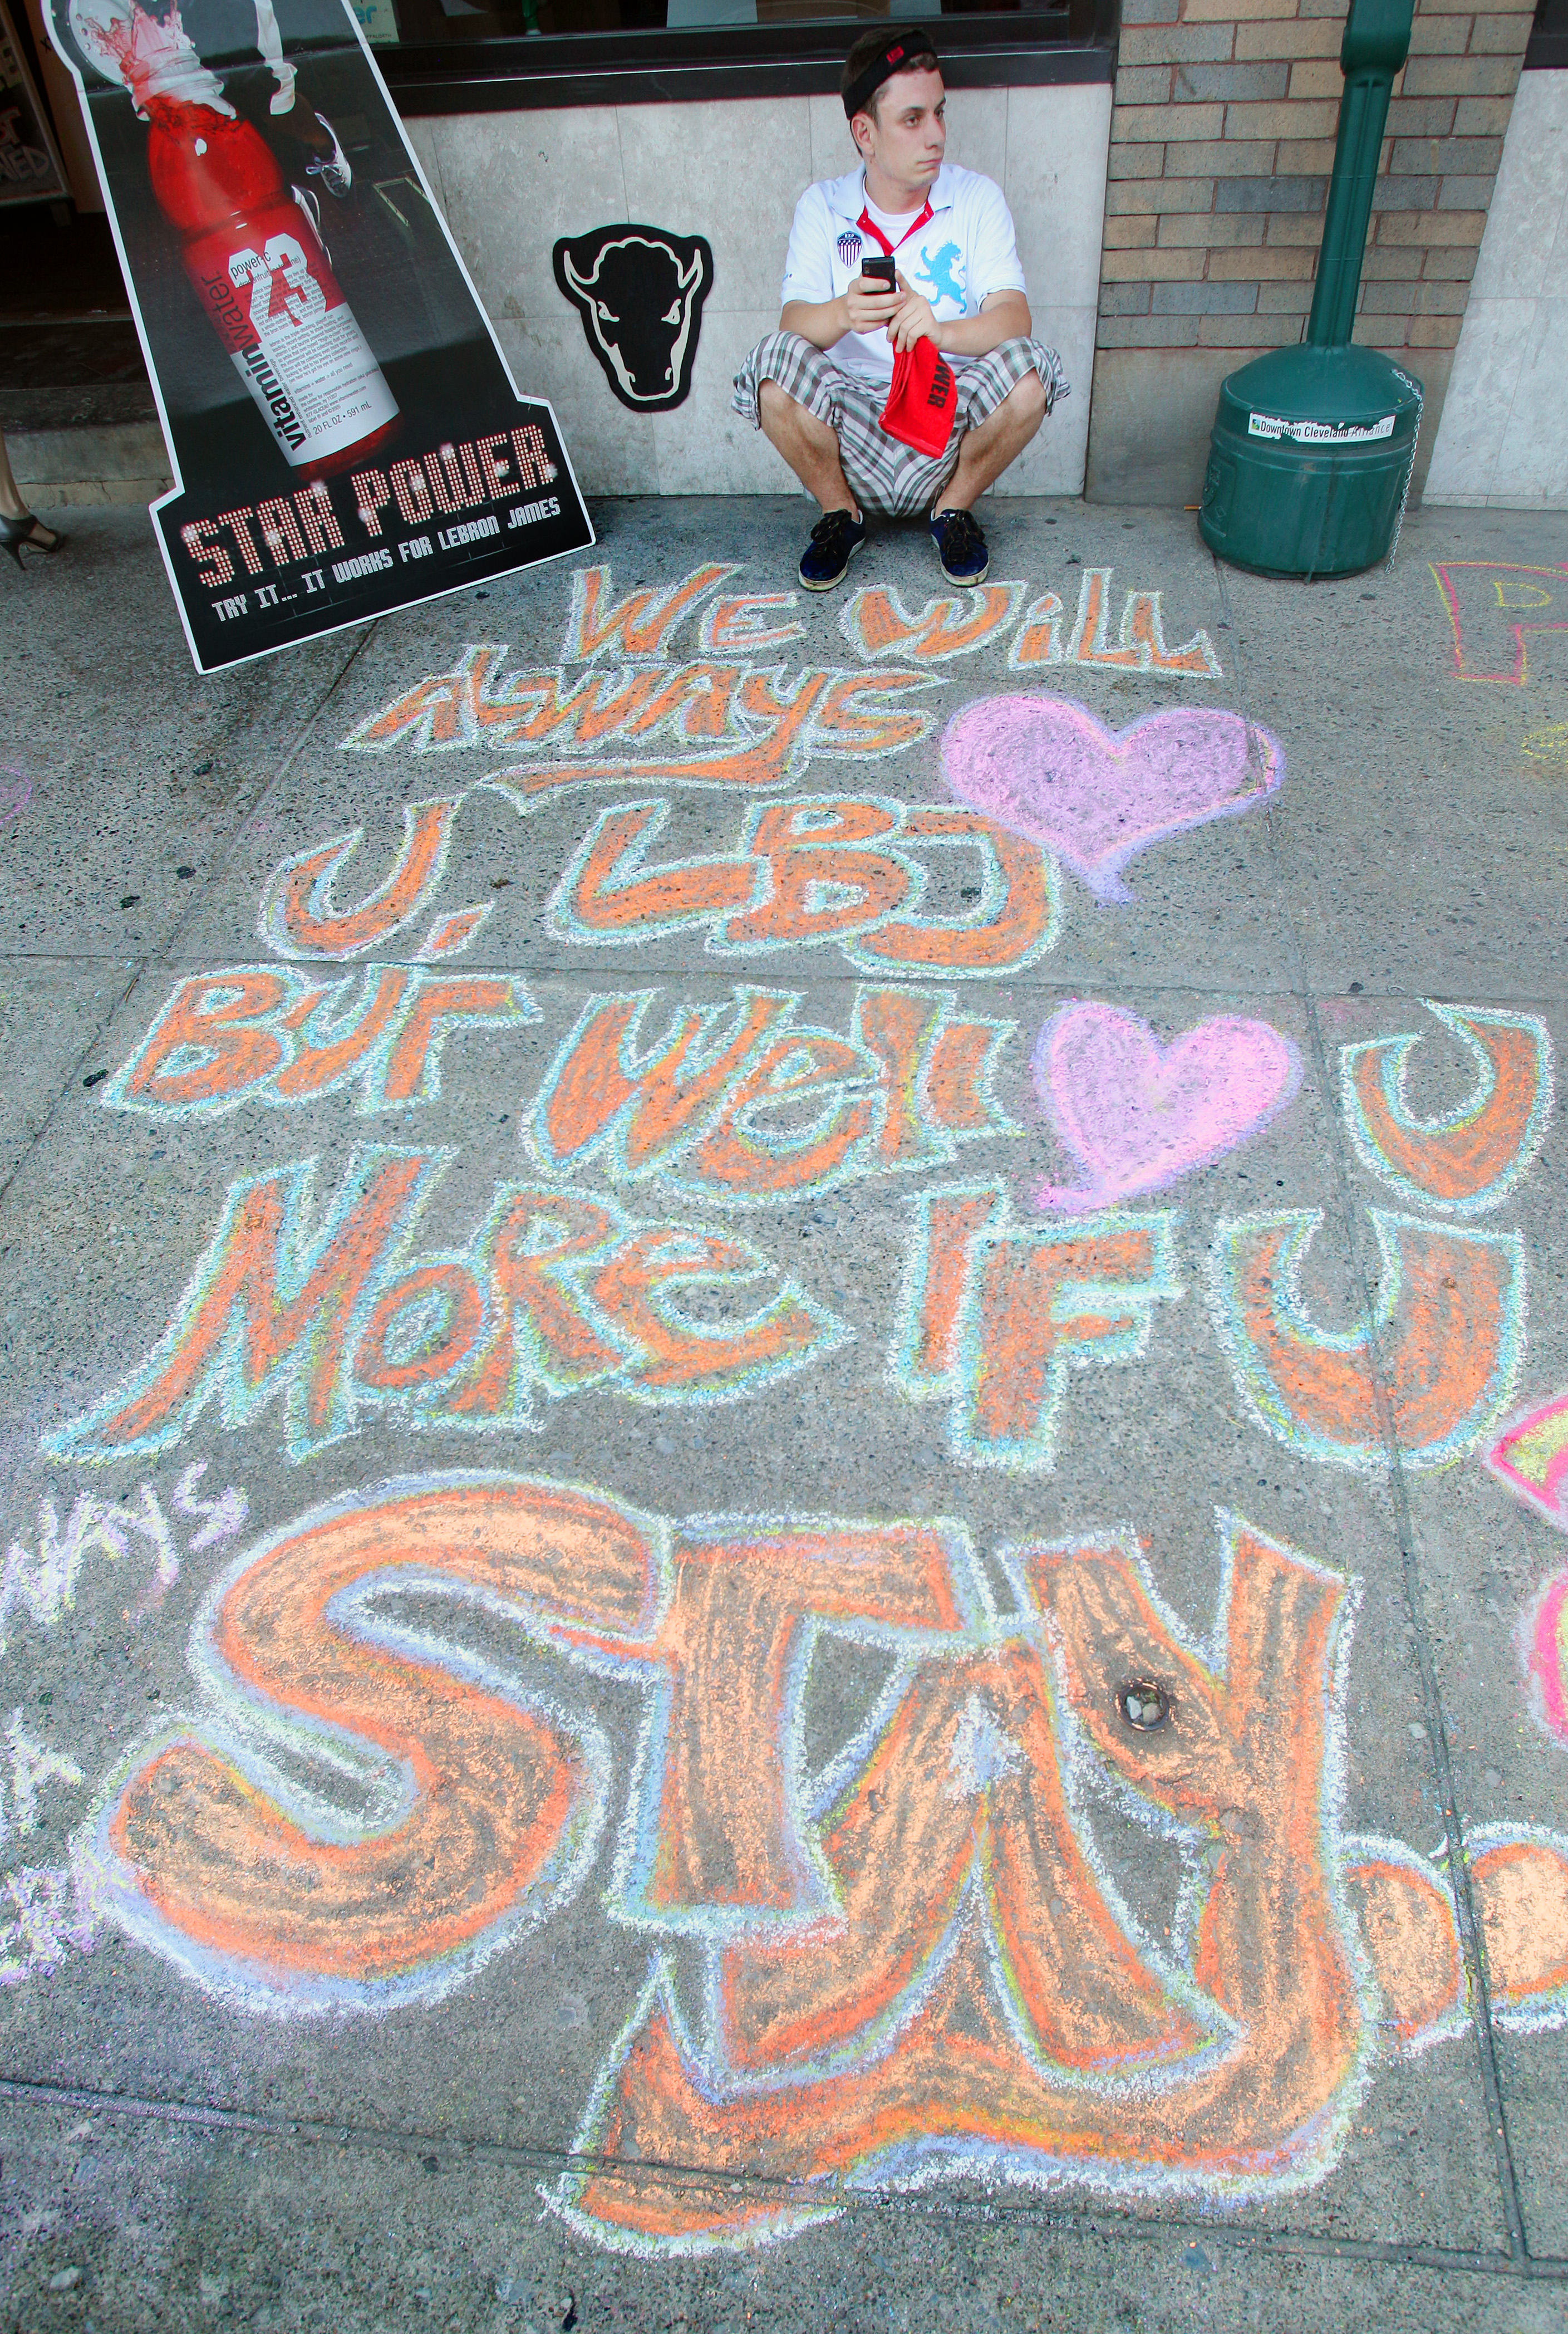 Michael Joseph of Solon waits for the LeBron James announcement of where he will play next year outside the Harry Buffalo restaurant in Cleveland July 8, 2010 by a chalk writing that a Cleveland Cavaliers fan wrote hoping LeBron stays in Cleveland.  (John Kuntz / The Plain Dealer) 